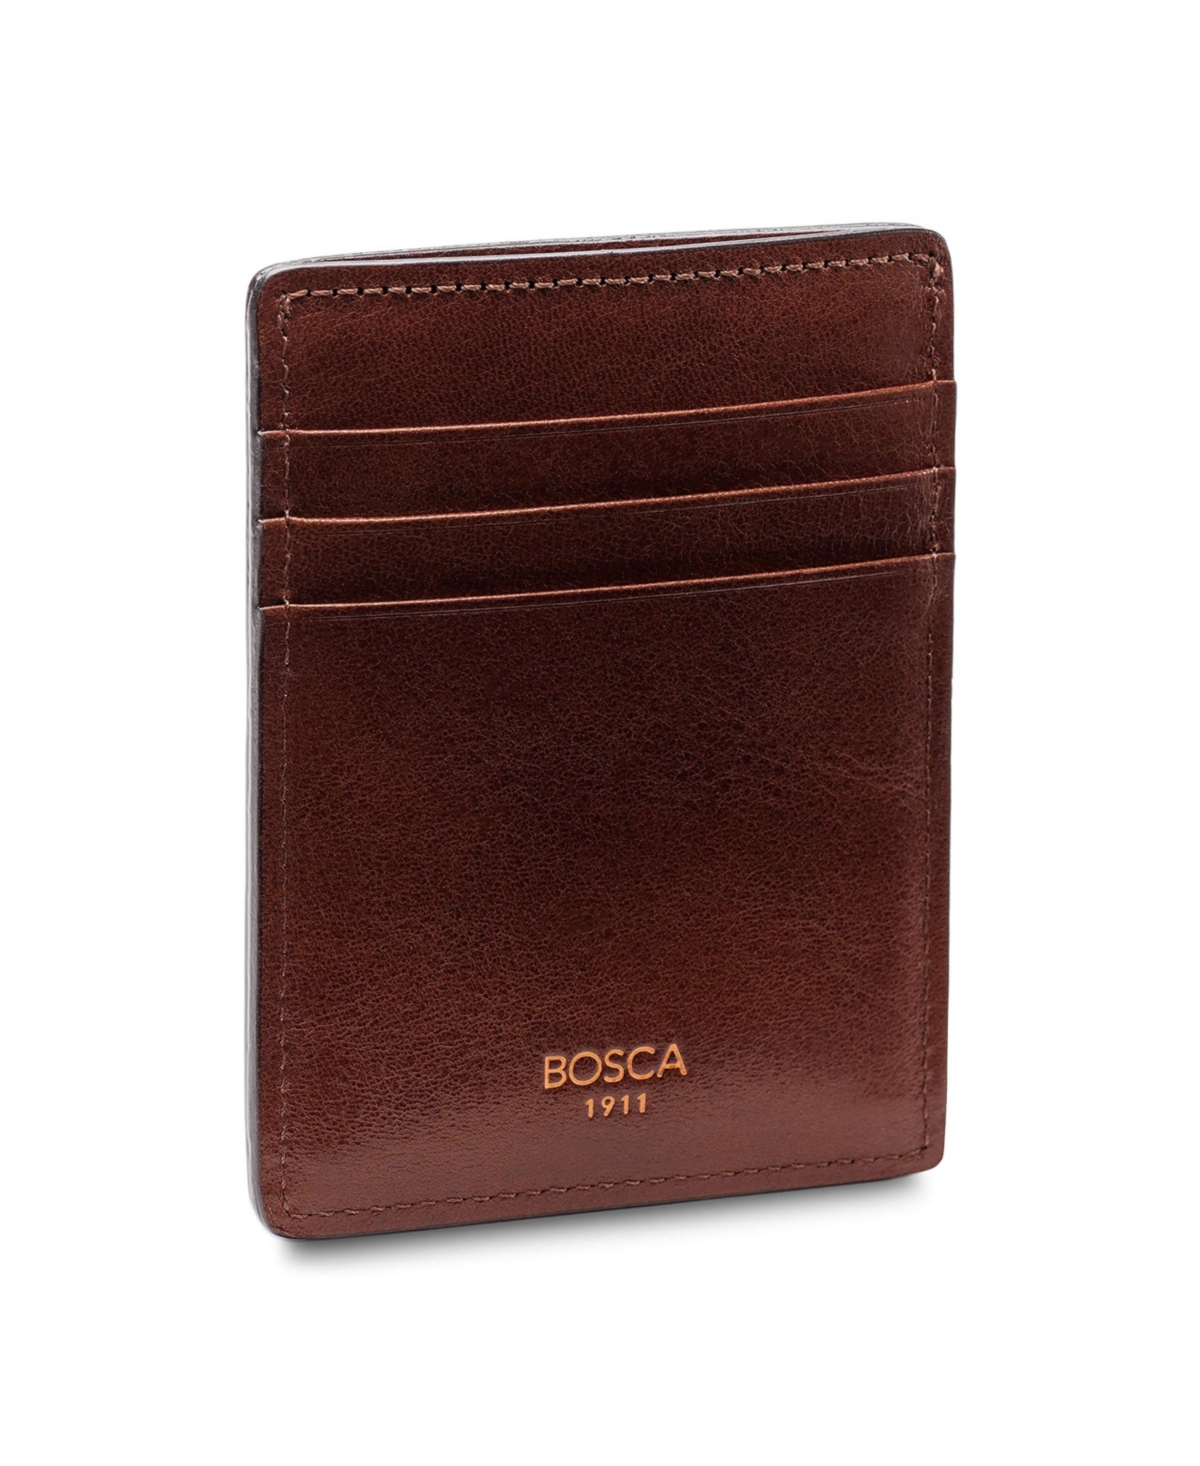 Men's Dolce Collection - Deluxe Front Pocket Wallet - Dark brown